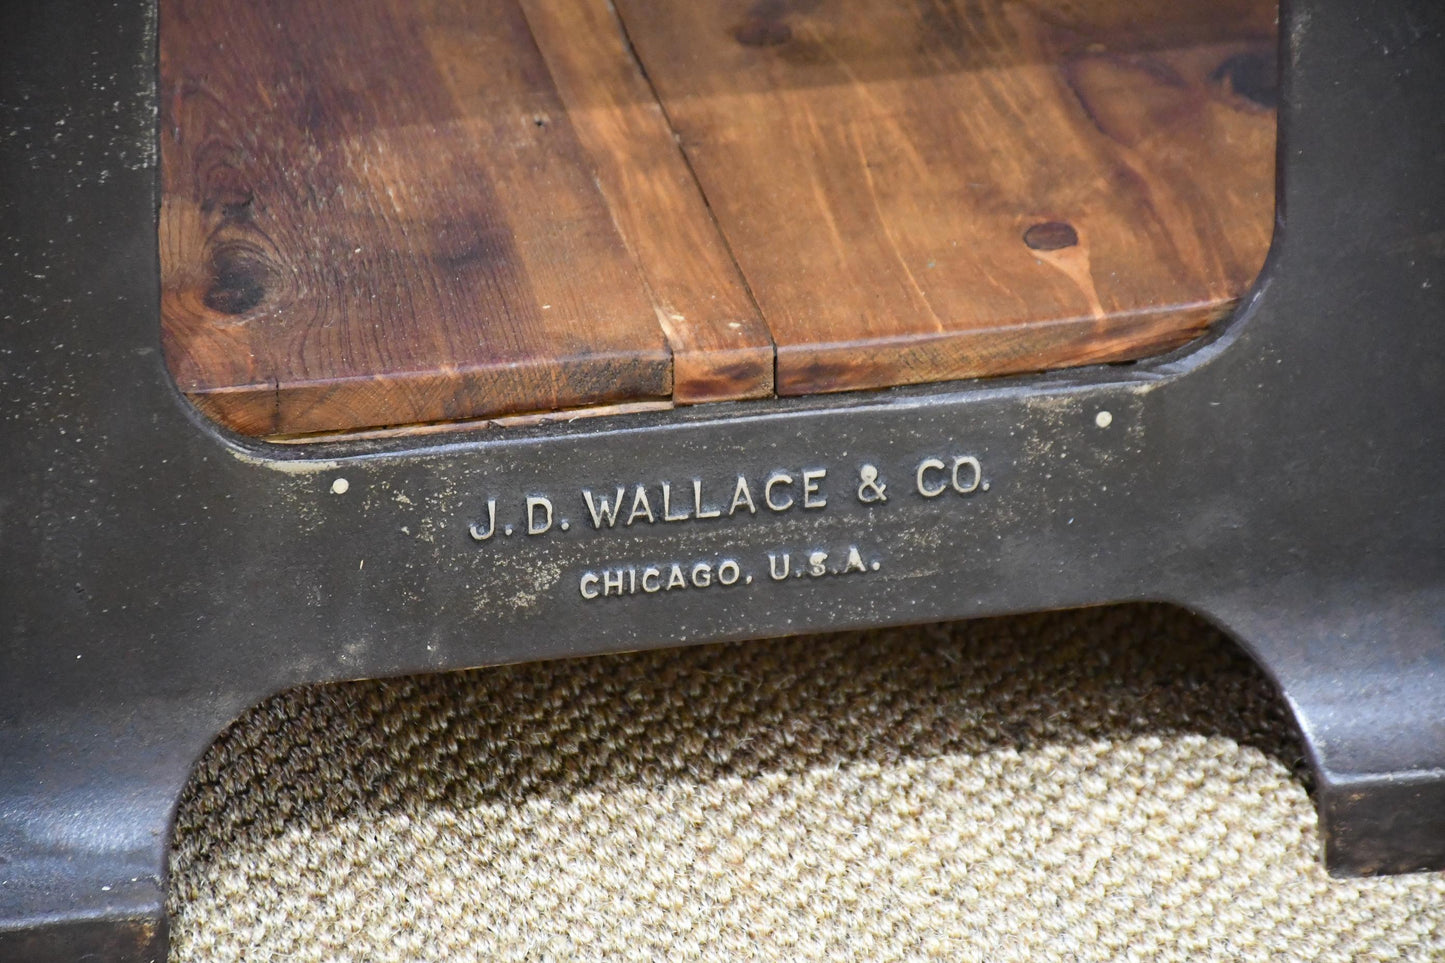 J.D. Wallace & Co. (Chicago) Industrial Butcher Block Work Table / Island